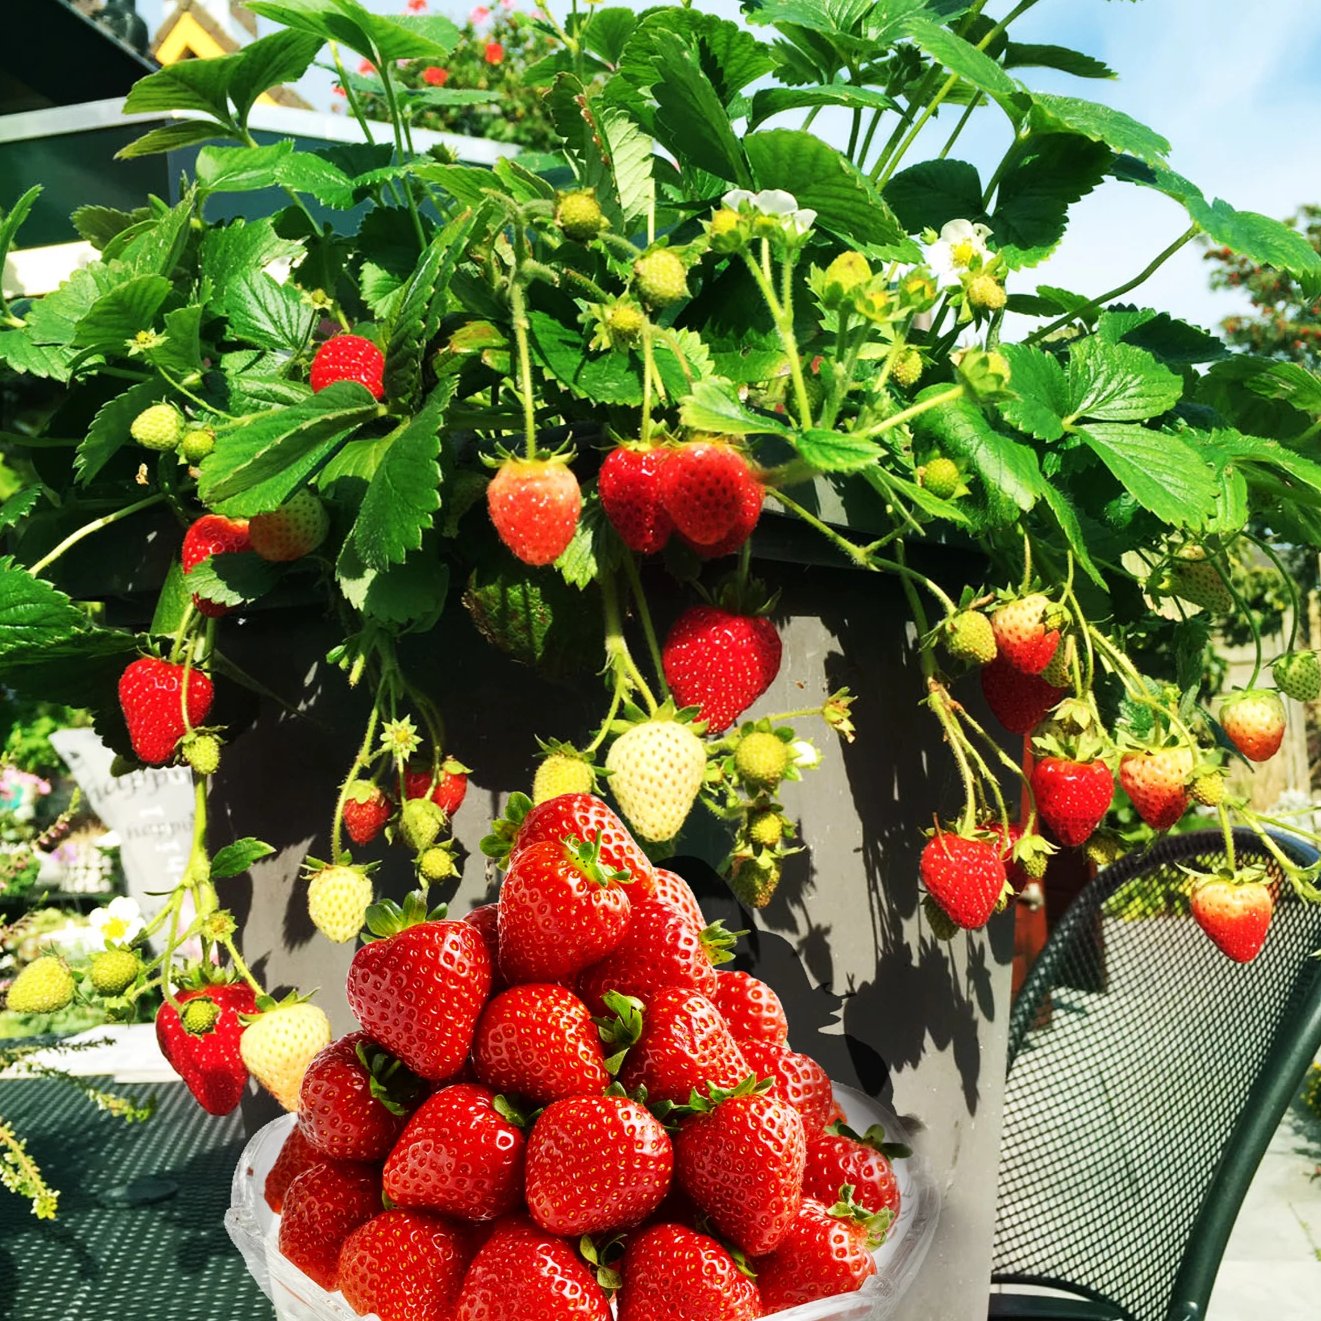 Delizz Strawberries Growing from their Plant, a Delizz Strawberry Plant